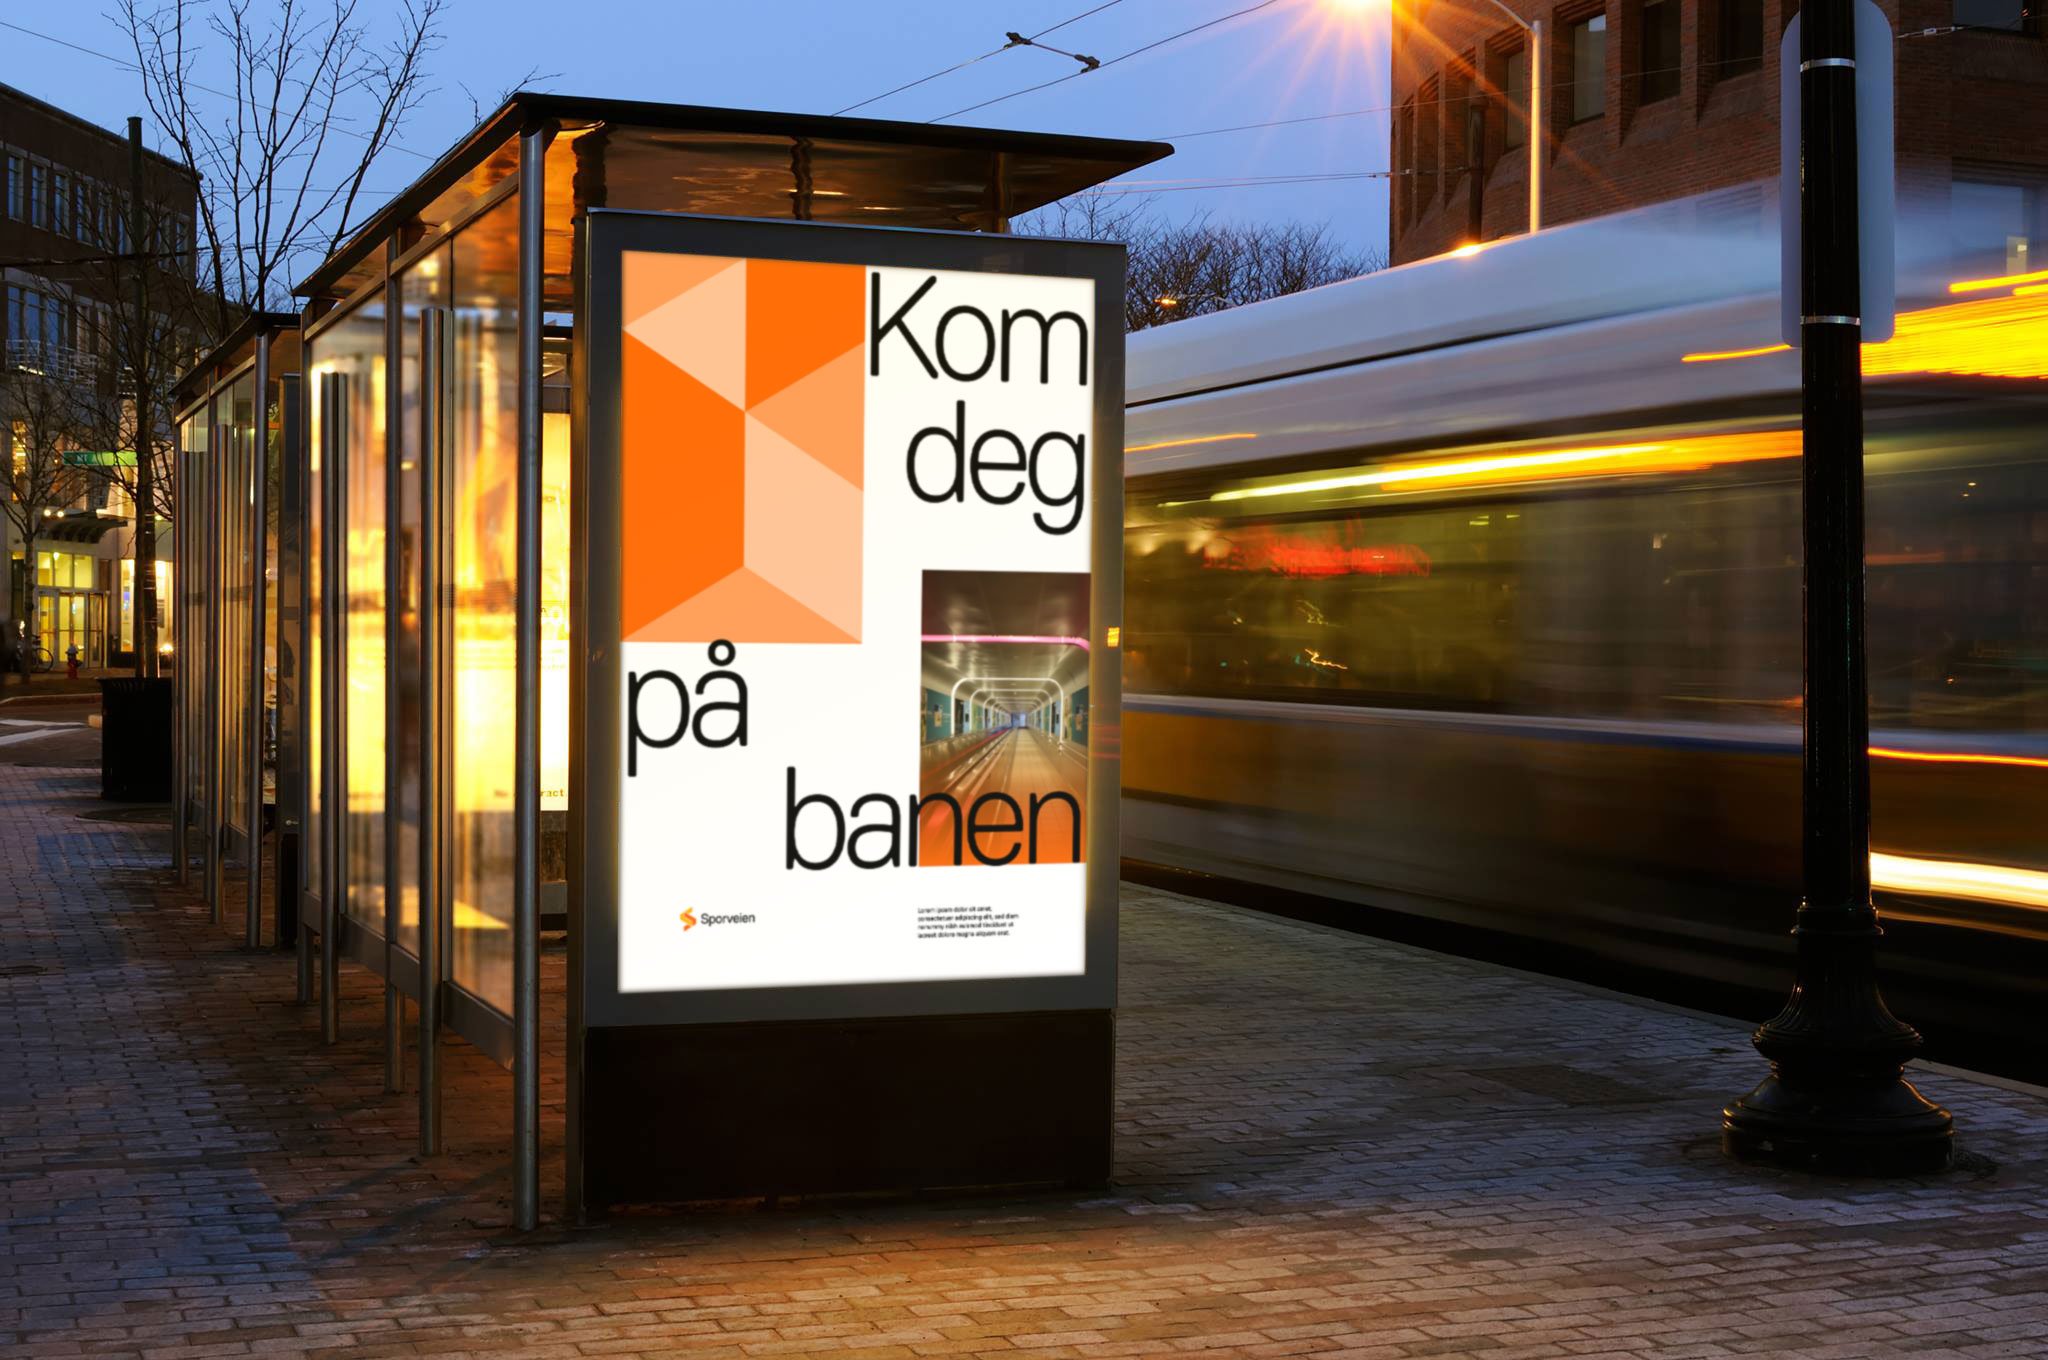 Poster from Sporveien's visual identity at a bus stop